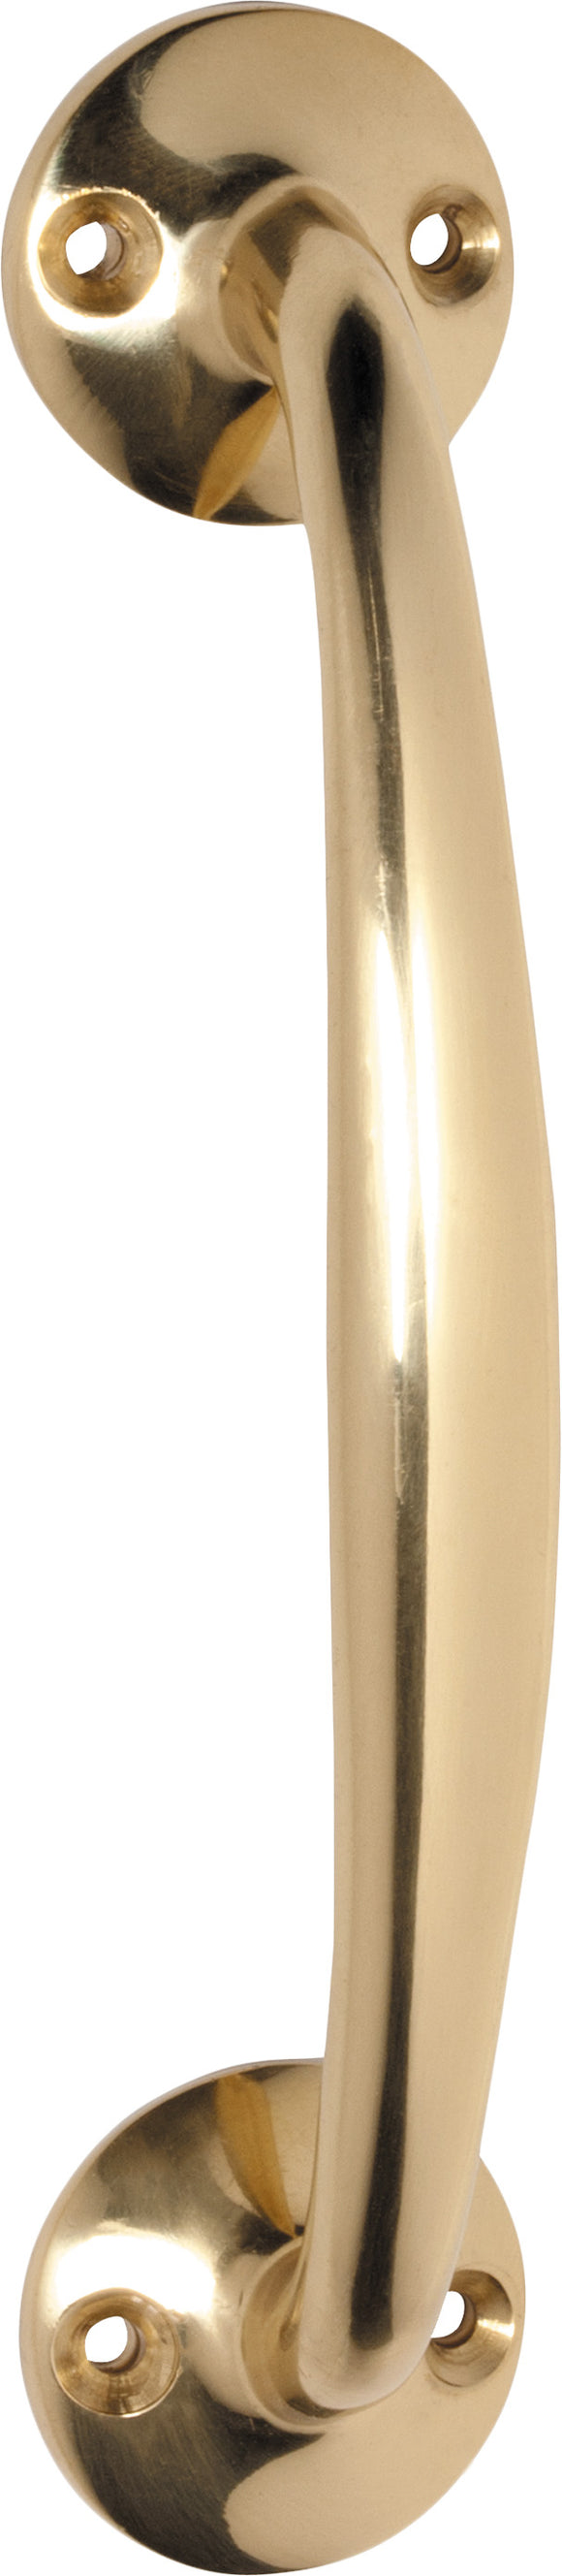 Pull Handle Telephone Polished Brass L150xP43mm